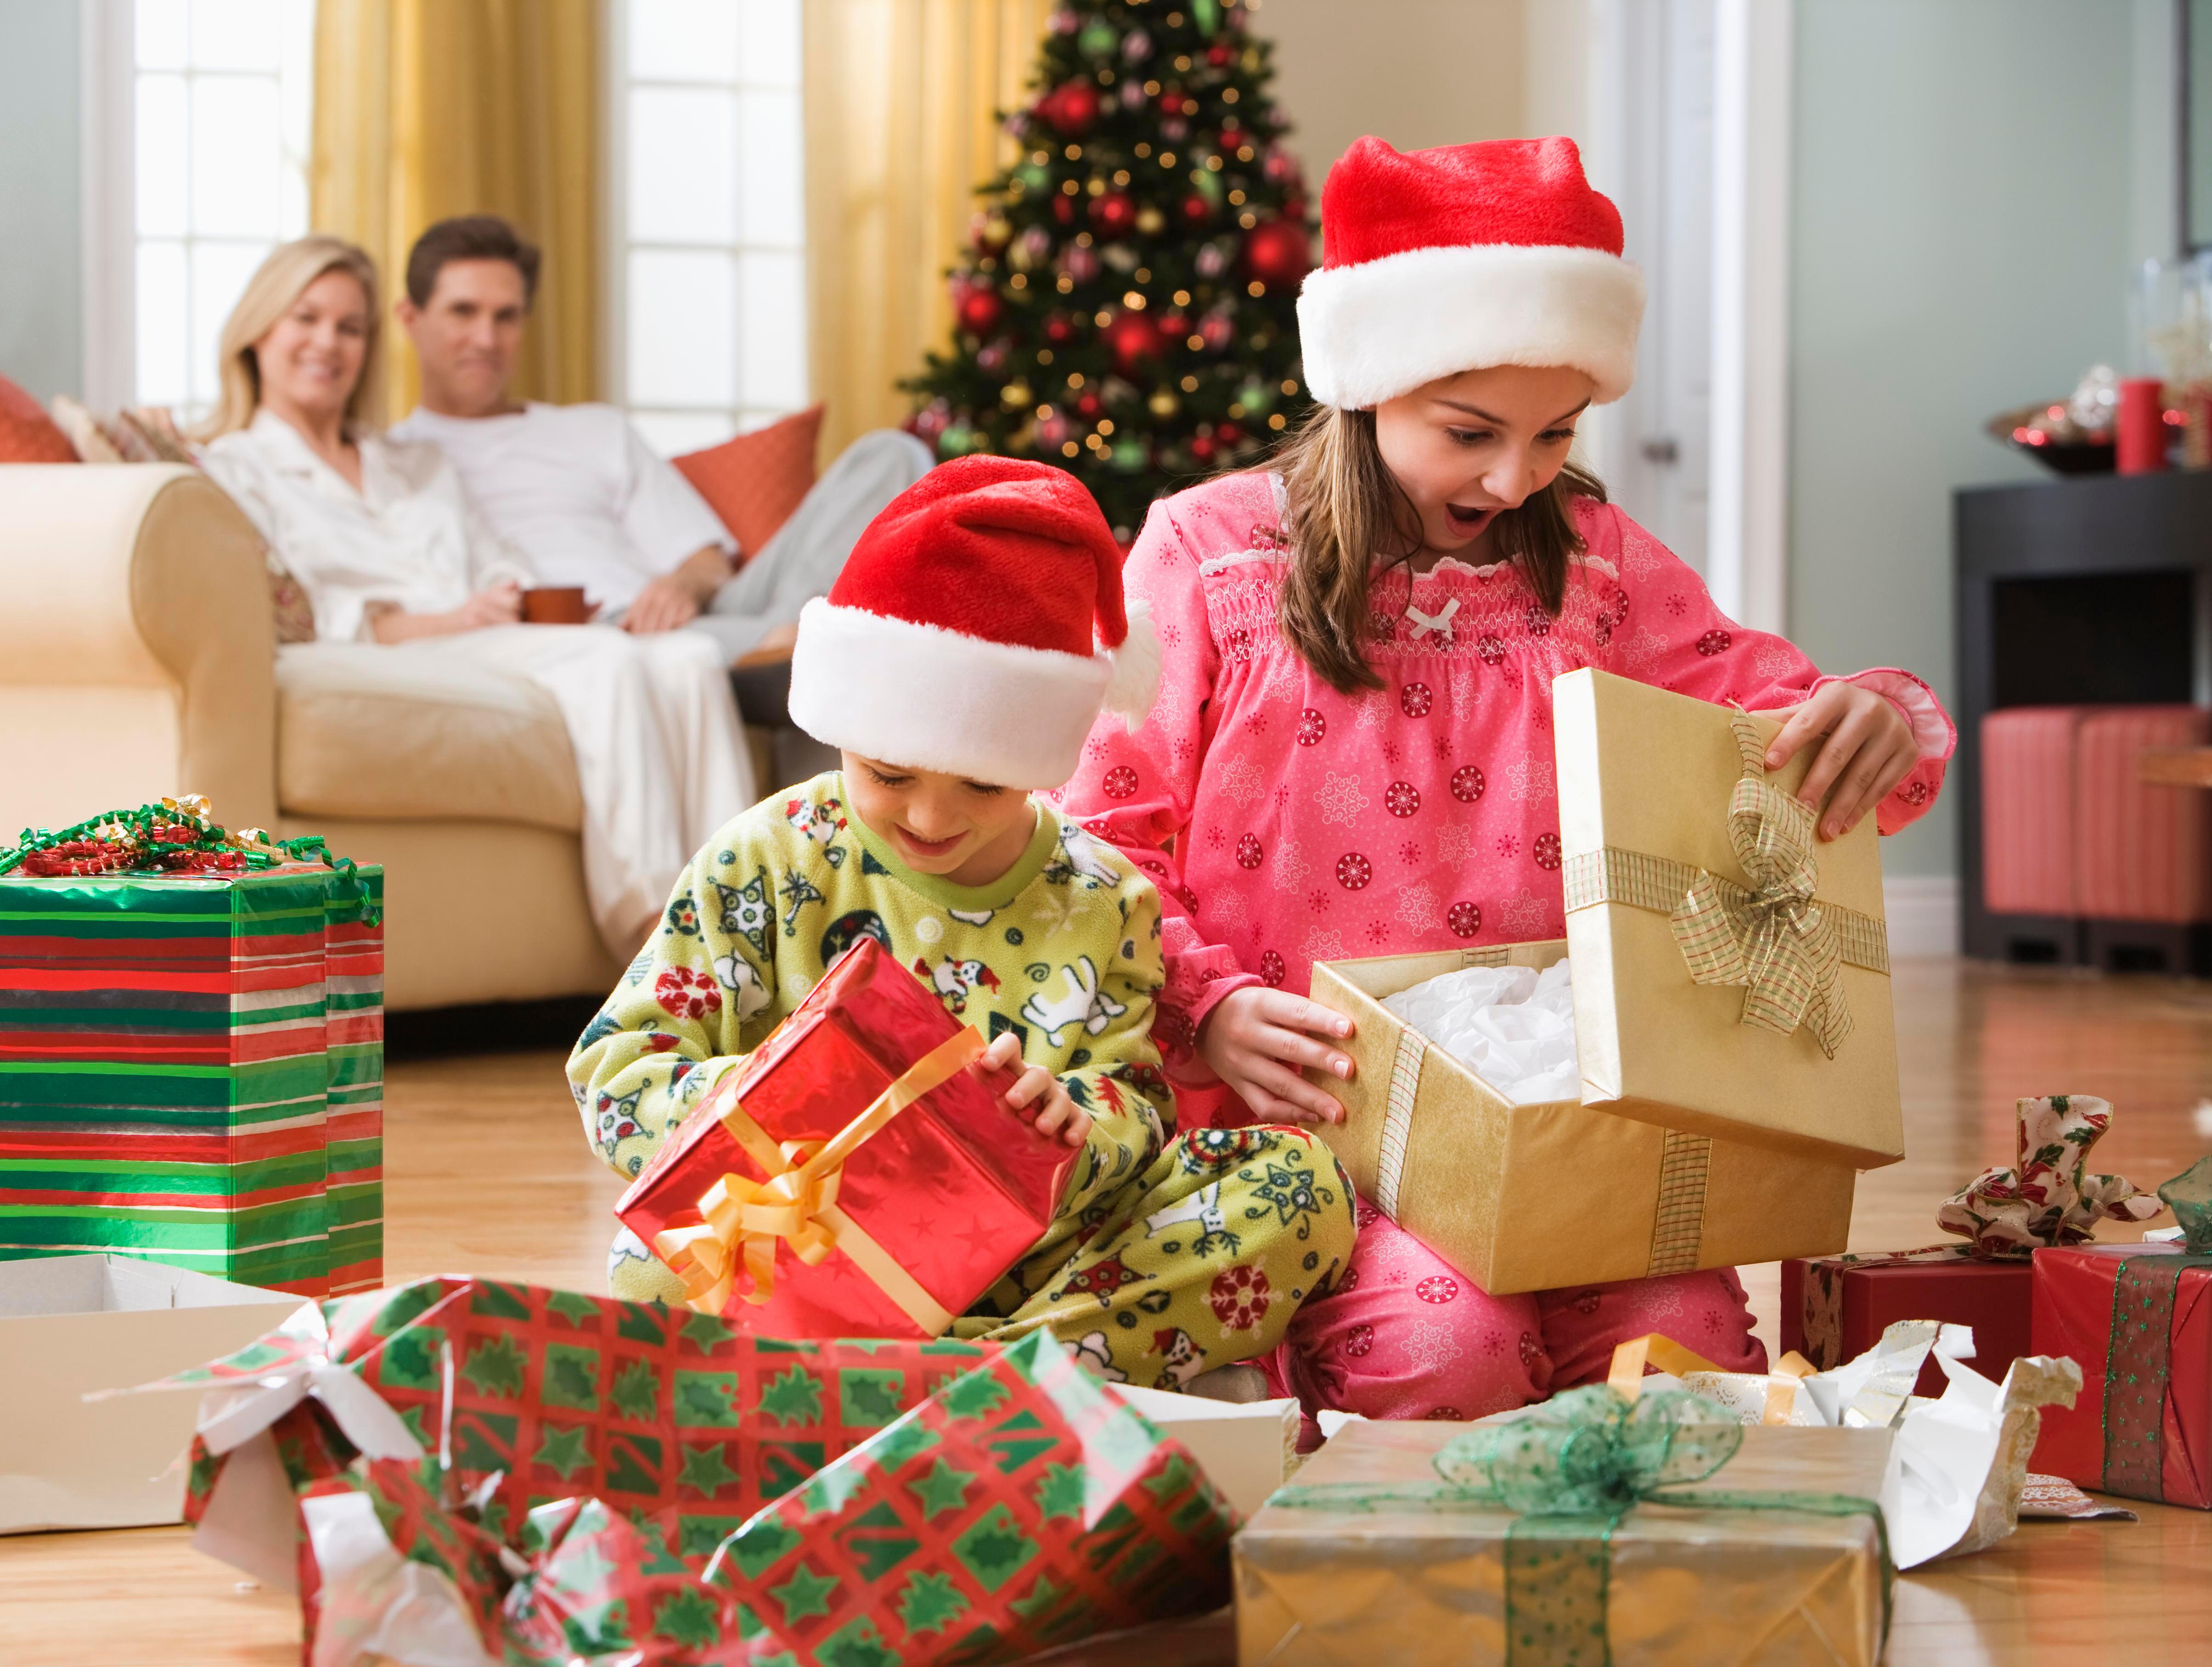 What will the kids be unwrapping on December 25 this year?